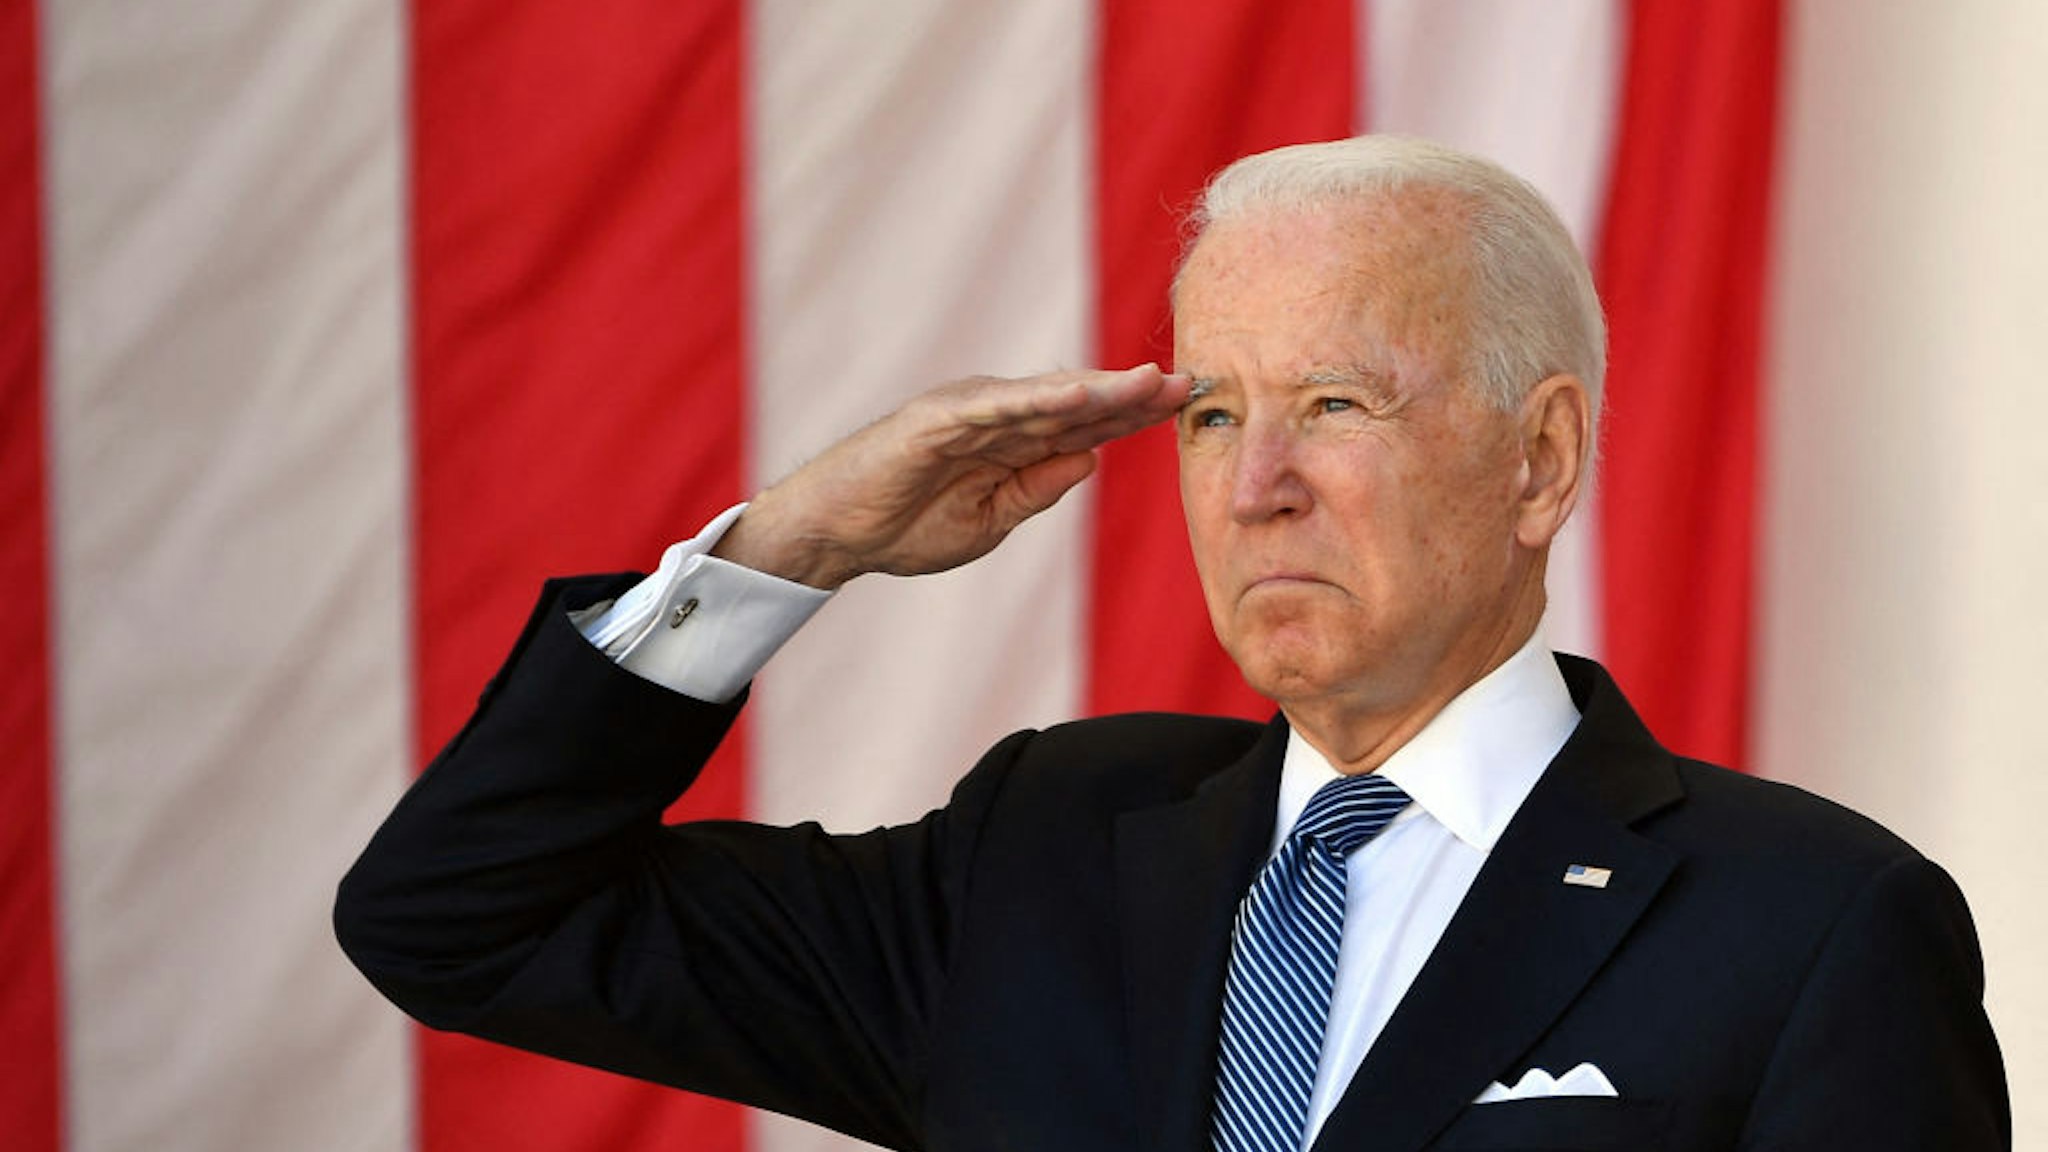 US President Joe Biden salutes before delivering an address at the 153rd National Memorial Day Observance at Arlington National Cemetery on Memorial Day in Arlington, Virginia on May 31, 2021.